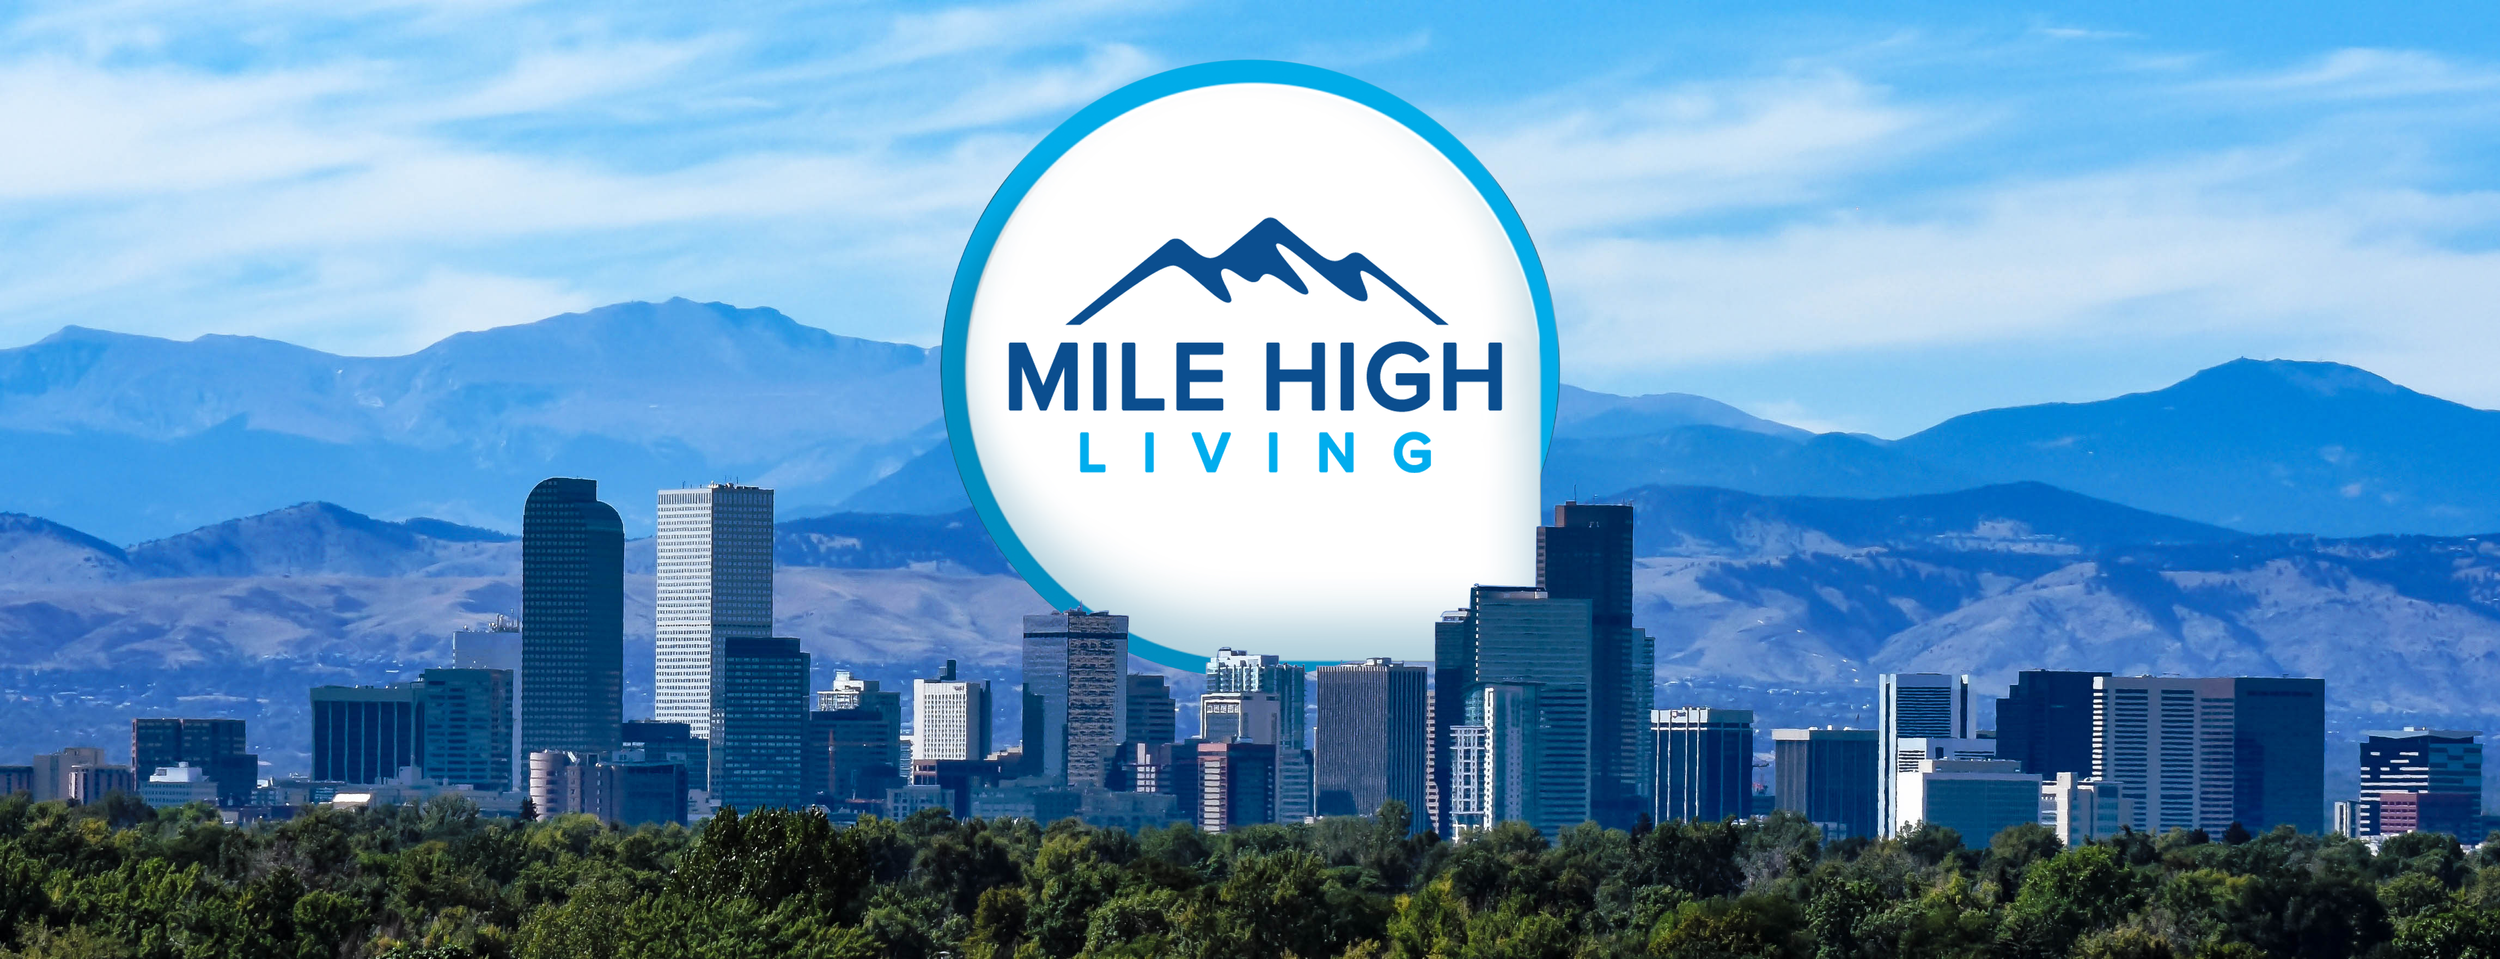 Mile high living.png